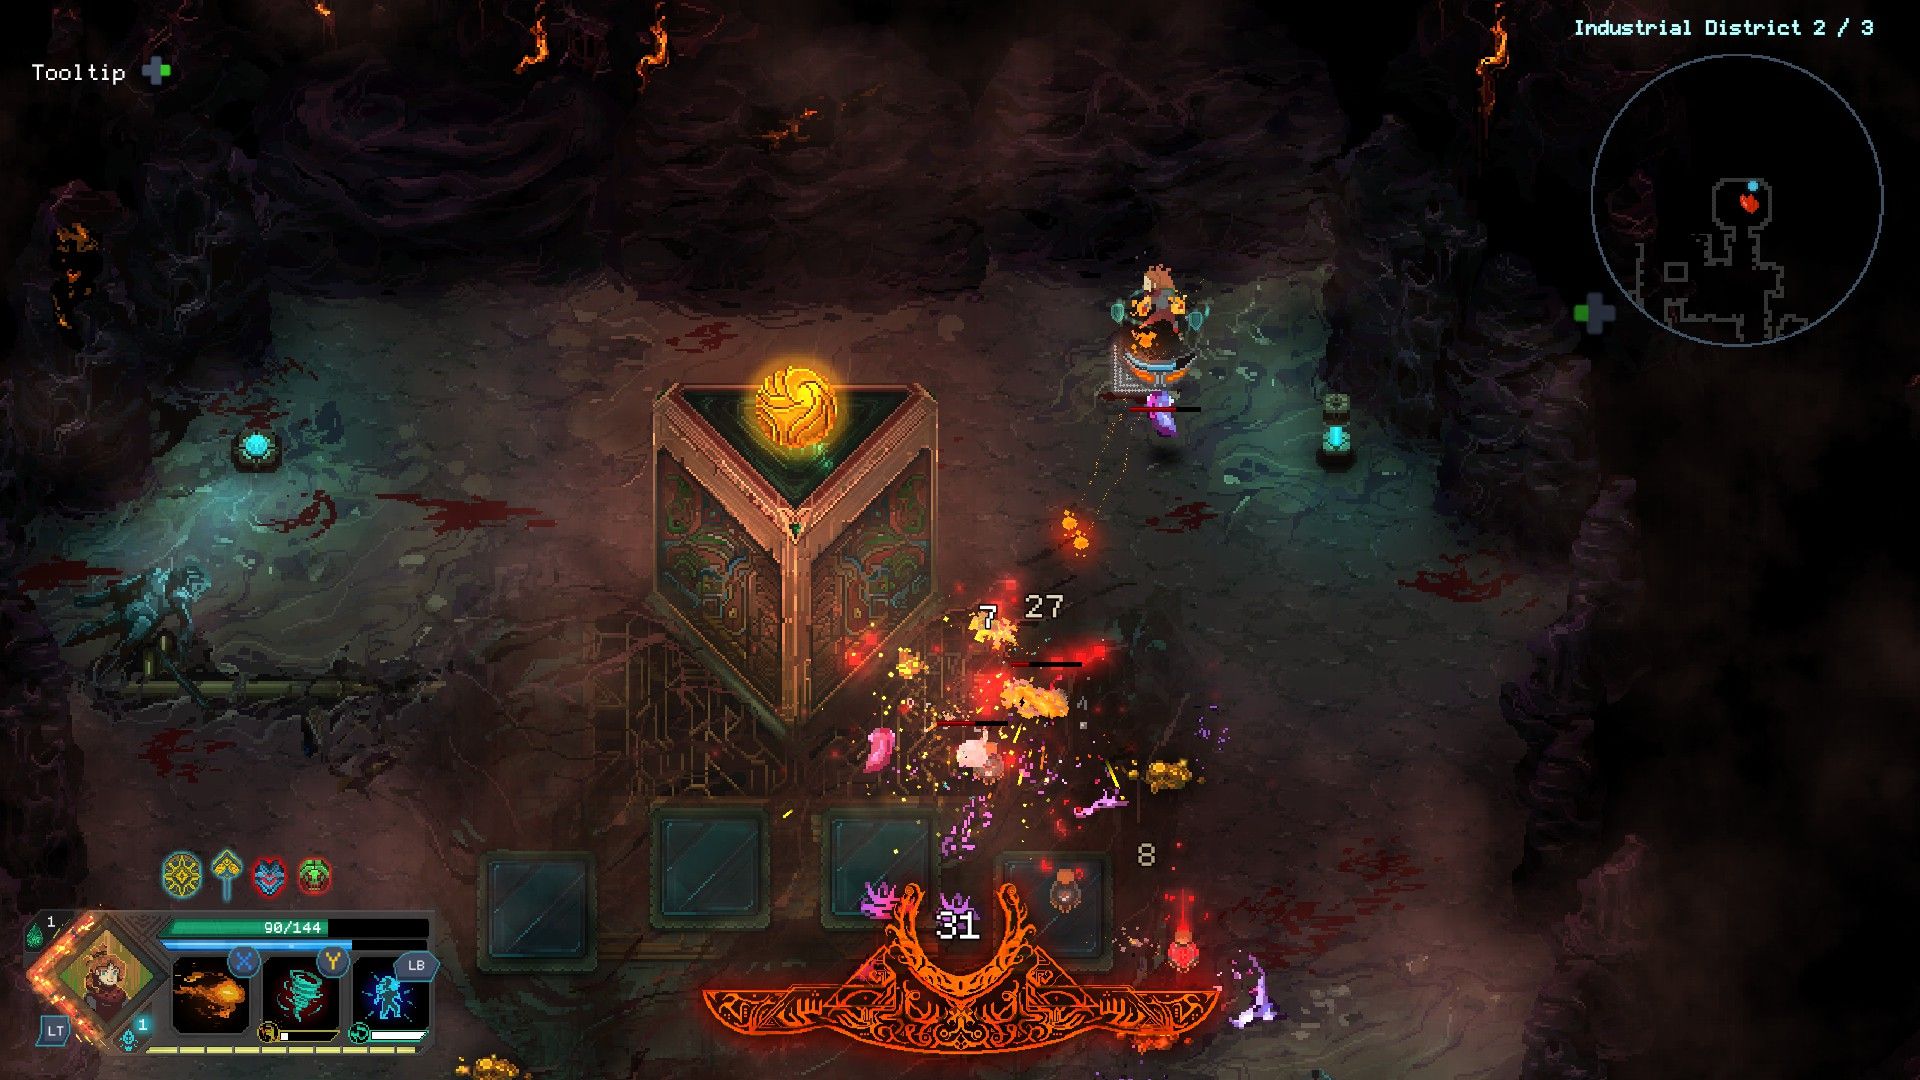 Lucy in Children of Morta, attacking enemies with fireballs